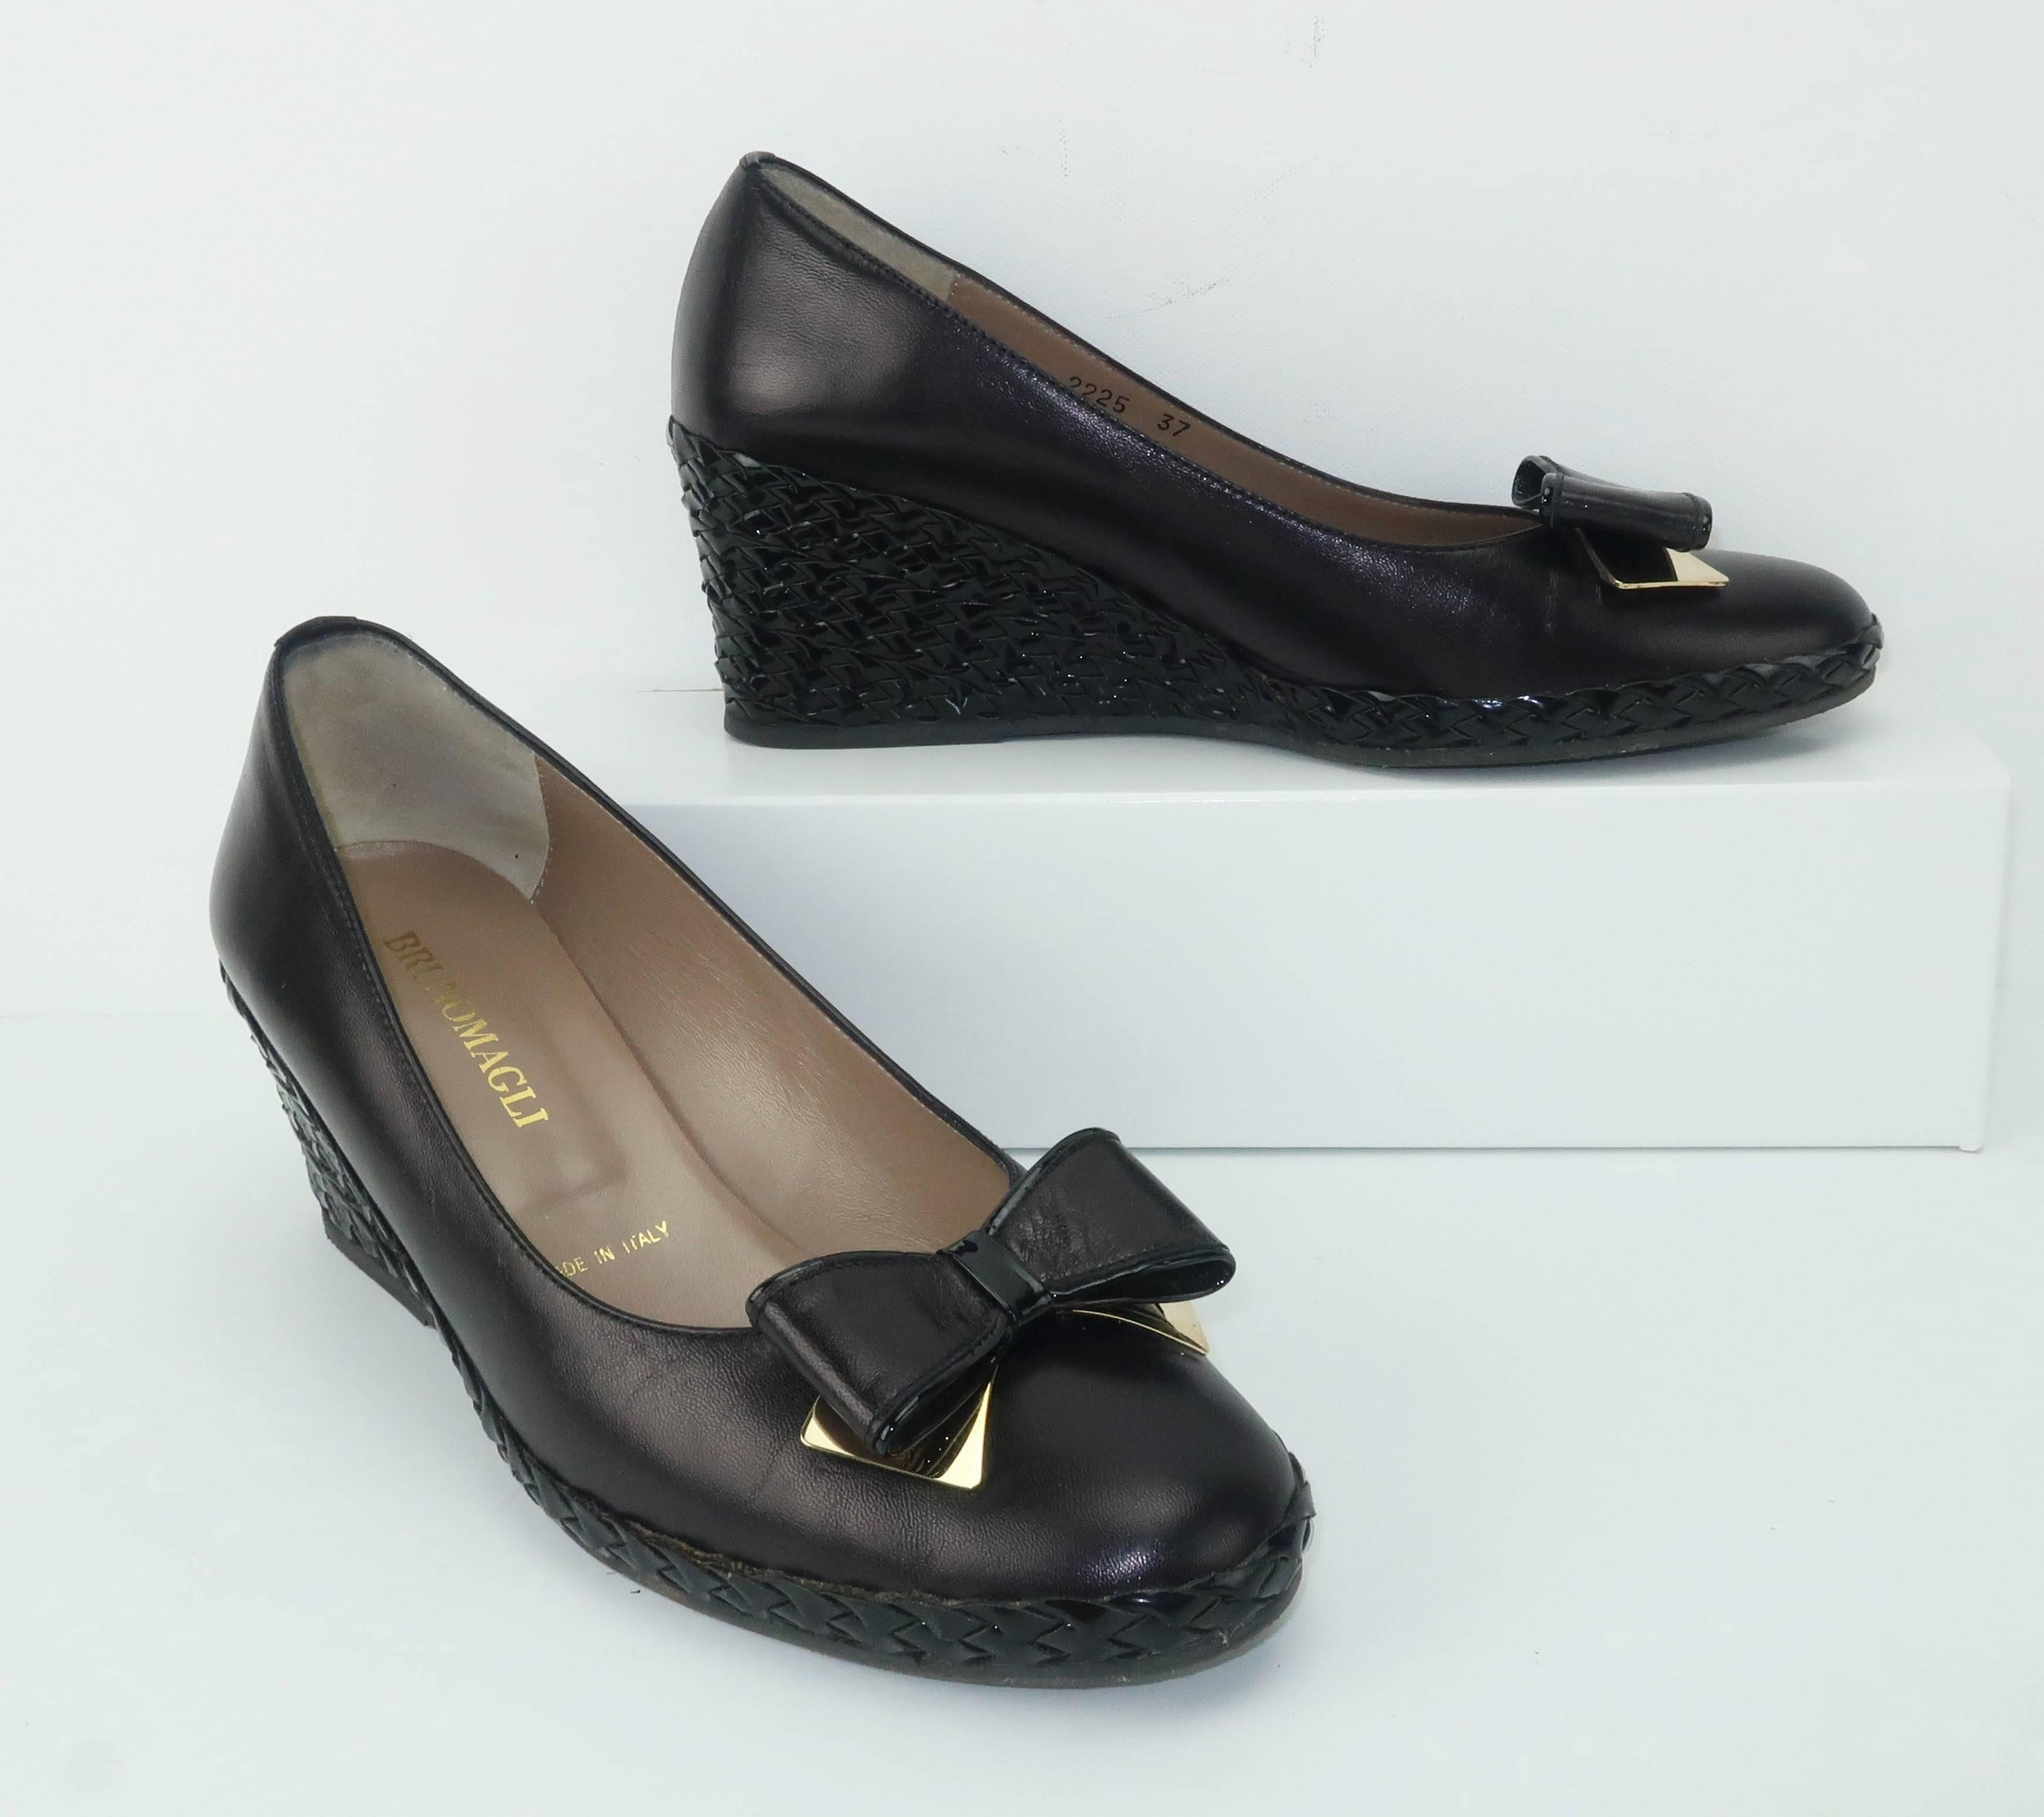 Bruno Magli has been producing quality Italian leather goods since 1936.  These comfortable black leather shoes have an espadrille style patent woven 2.5